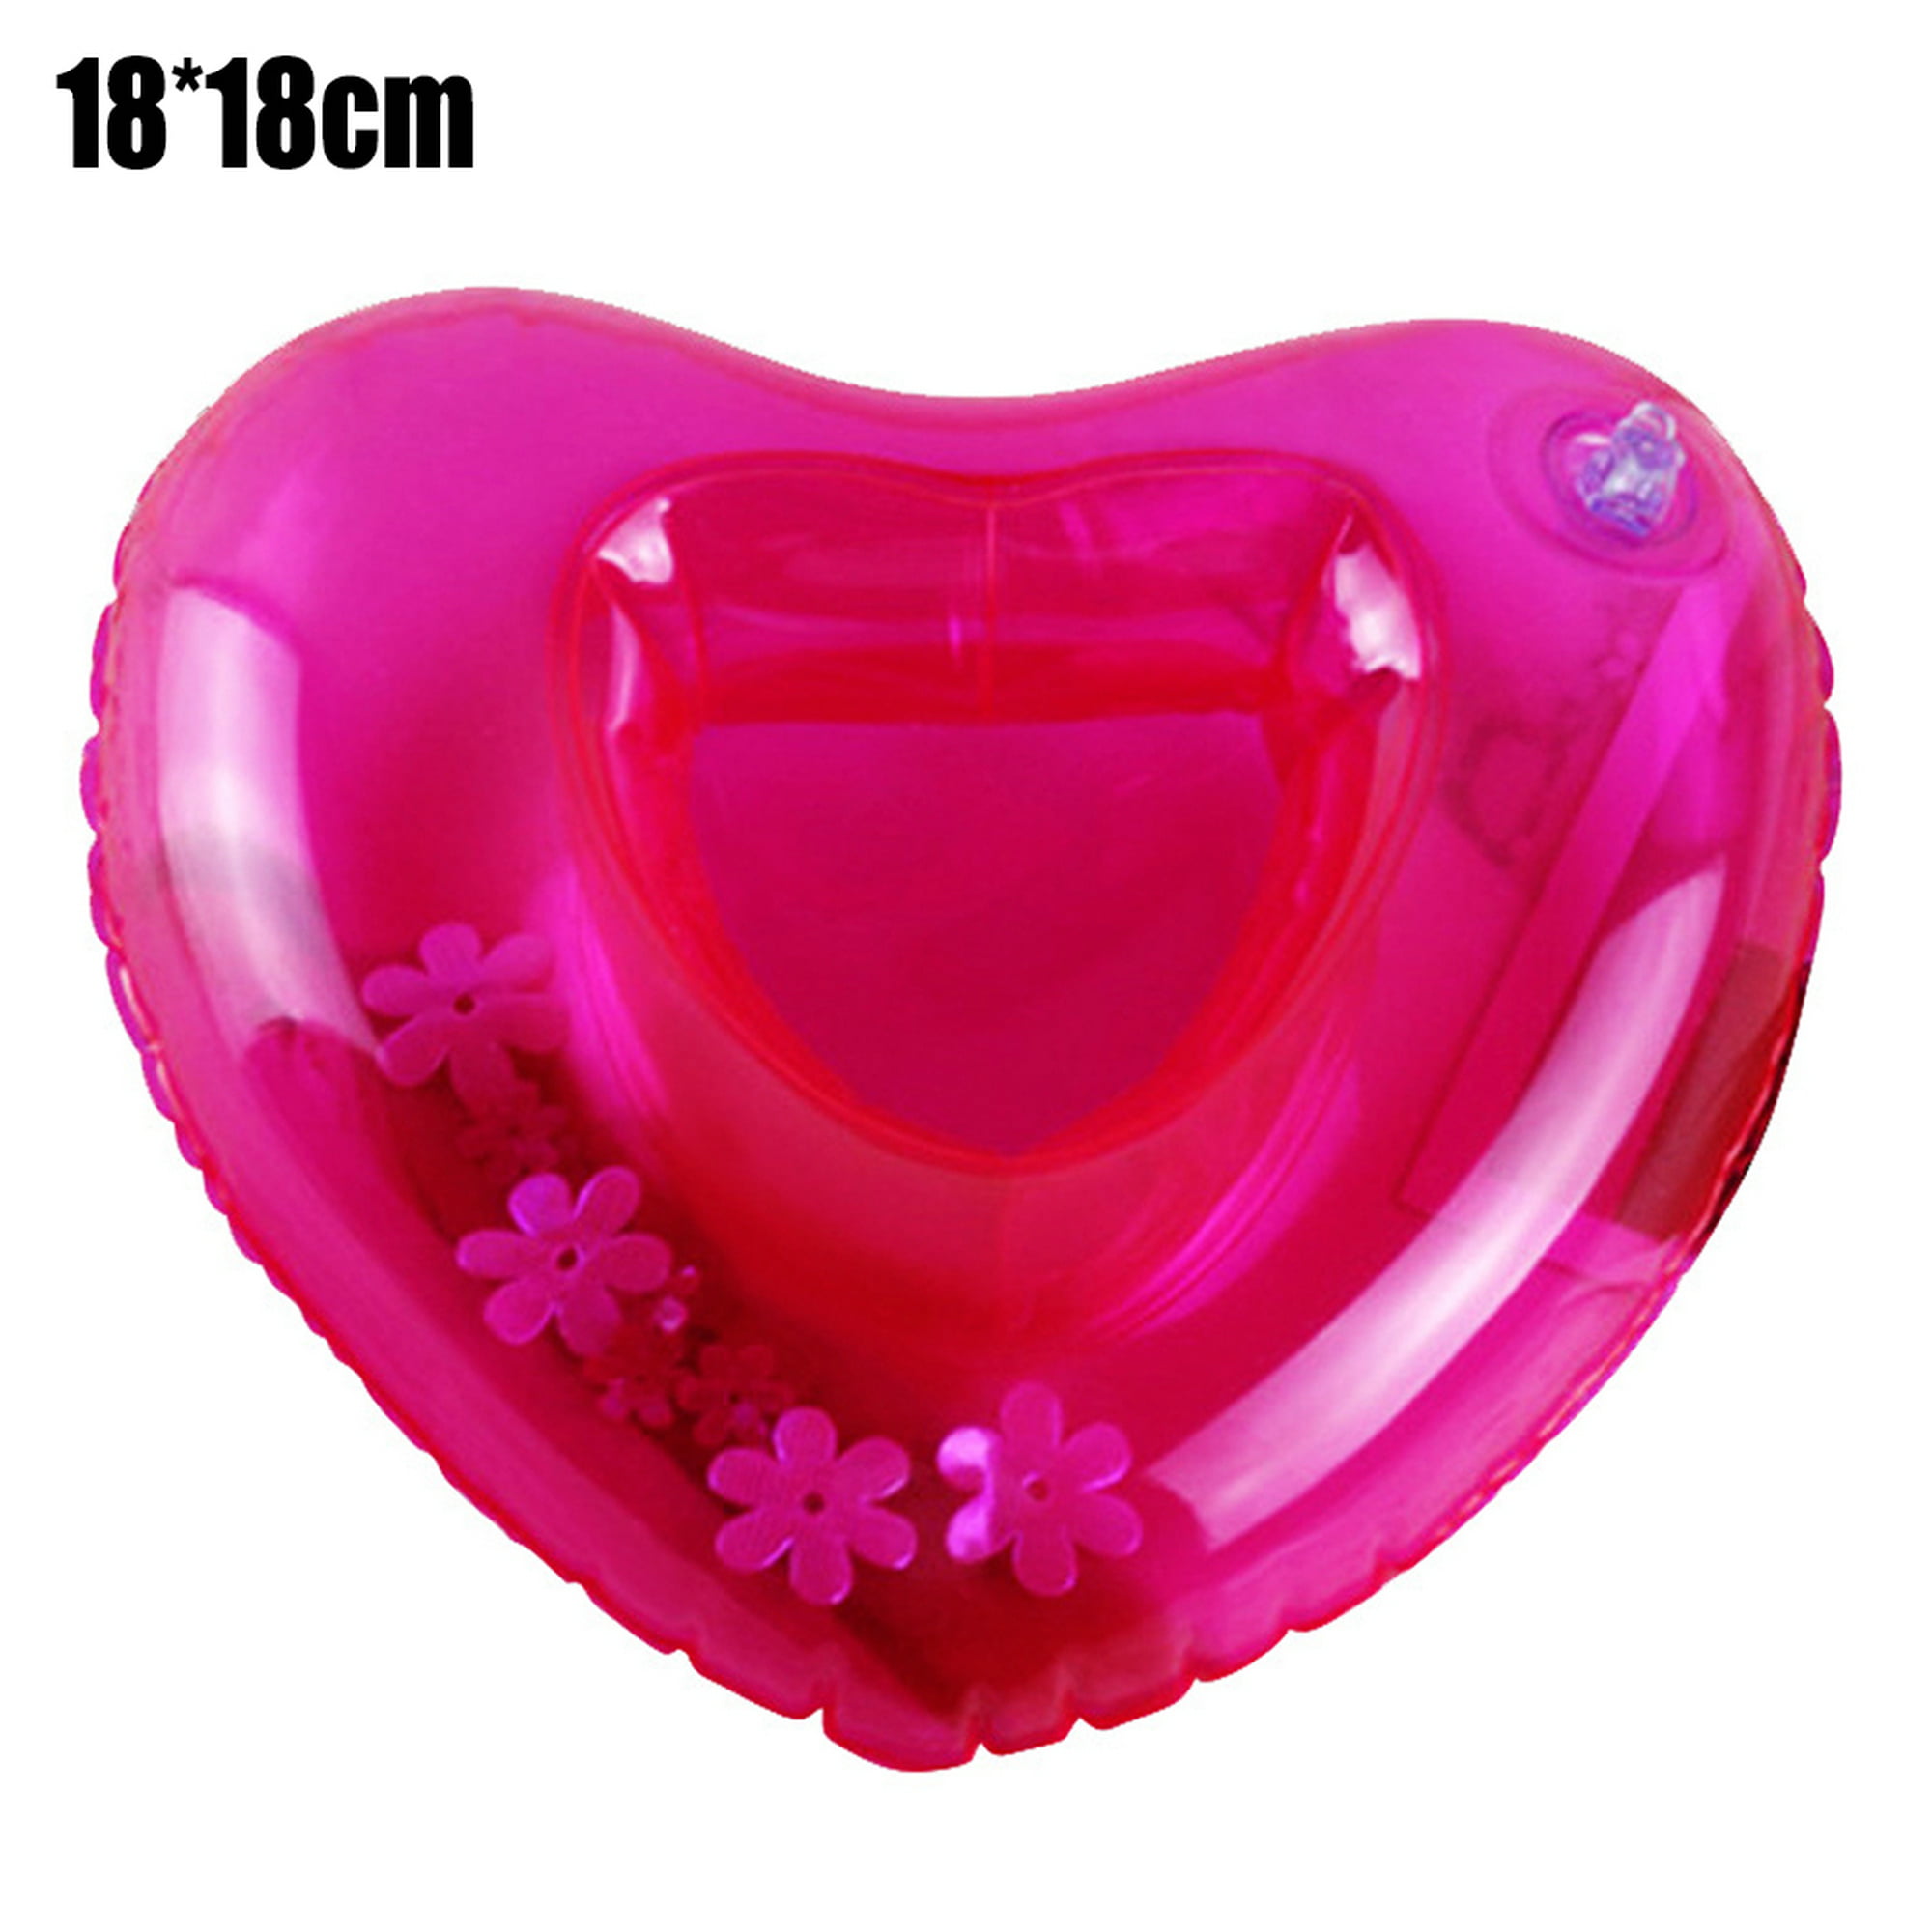 Crab Inflatable Cup Holder Drinks Floating Beach Pool Party Can Swimming Toy